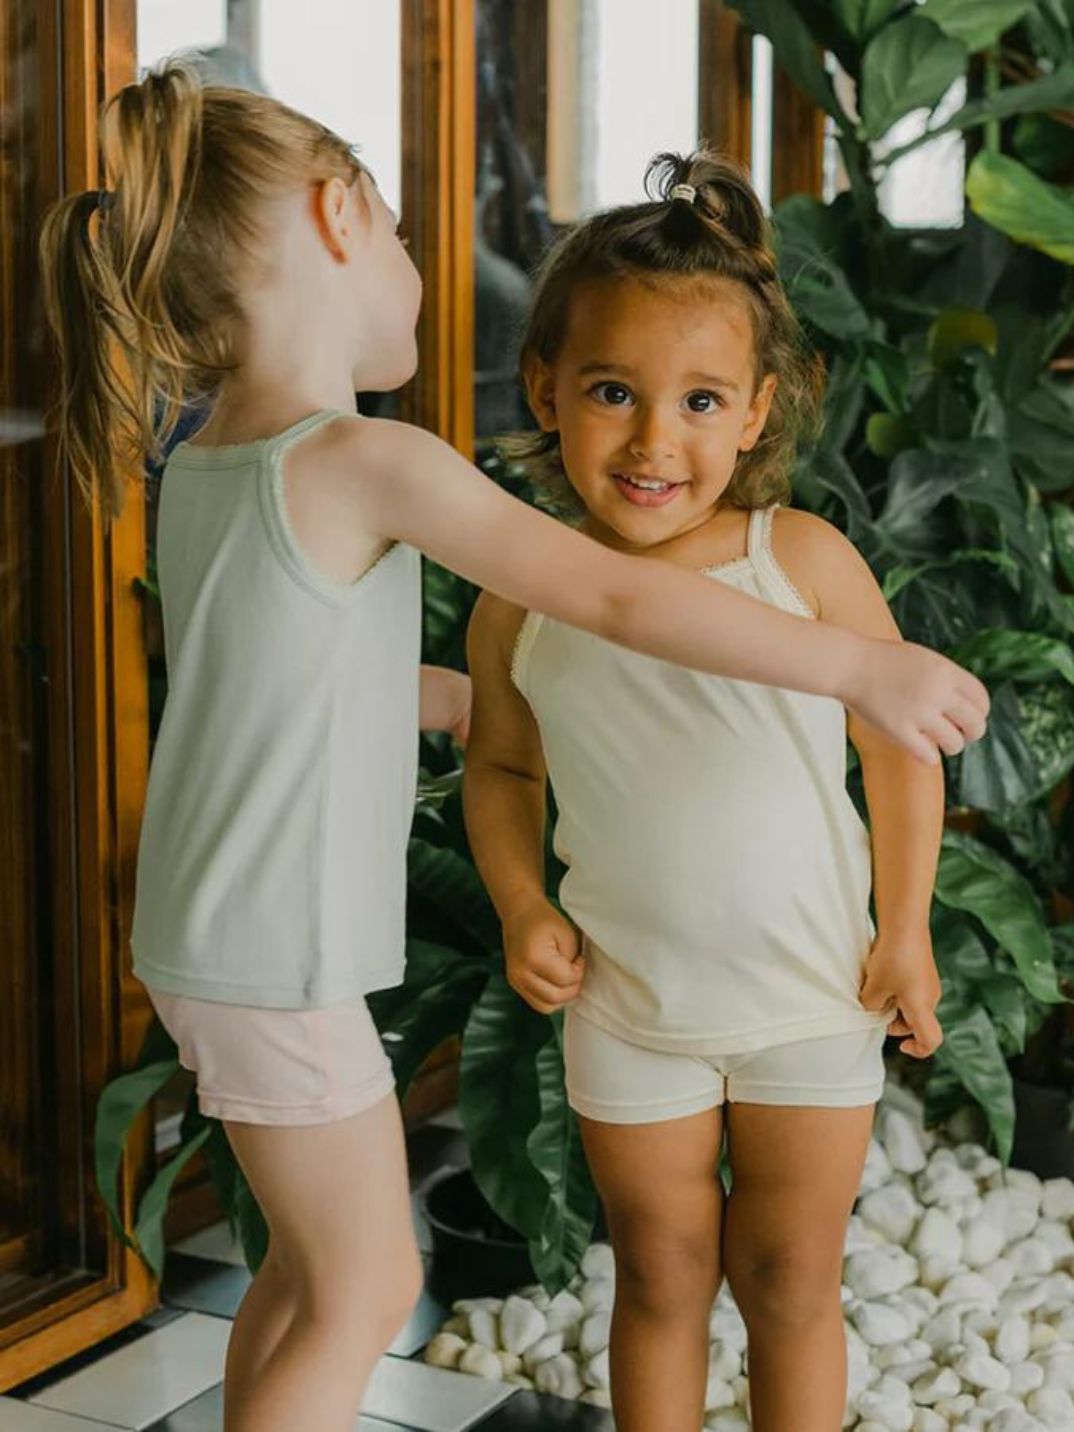 Just Peachy Camisoles are super soft and gentle on your little ones' skin. Designed with a snug fit for play, movement and a comfy night's rest. Add the breathable Camisole layer under your day clothes or snooze in maximum comfort. Made with Lenzing® TENCEL™ Micro Modal Fibers interwoven with Eco Soft Technology exclusively for Just Peachy. Green and cream kids super comfortable kids camis. Sustainable eco-friendly brand.